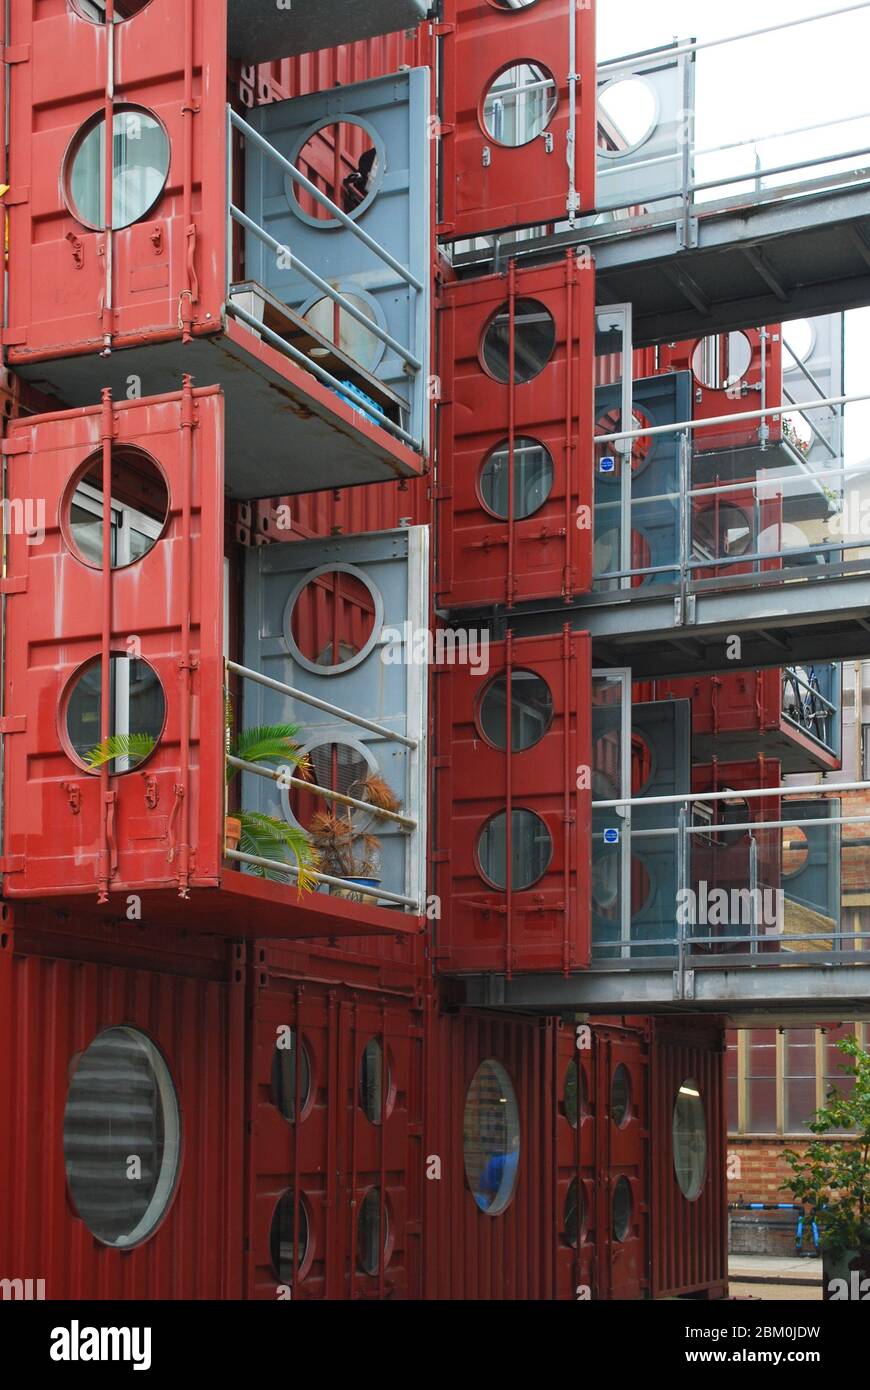 Shipping Containers Colourful Re-Use Accommodation Flexible Low-Cost Housing Container City, 64 Orchard Place, Trinity Buoy Wharf, London E14 0JW Stock Photo